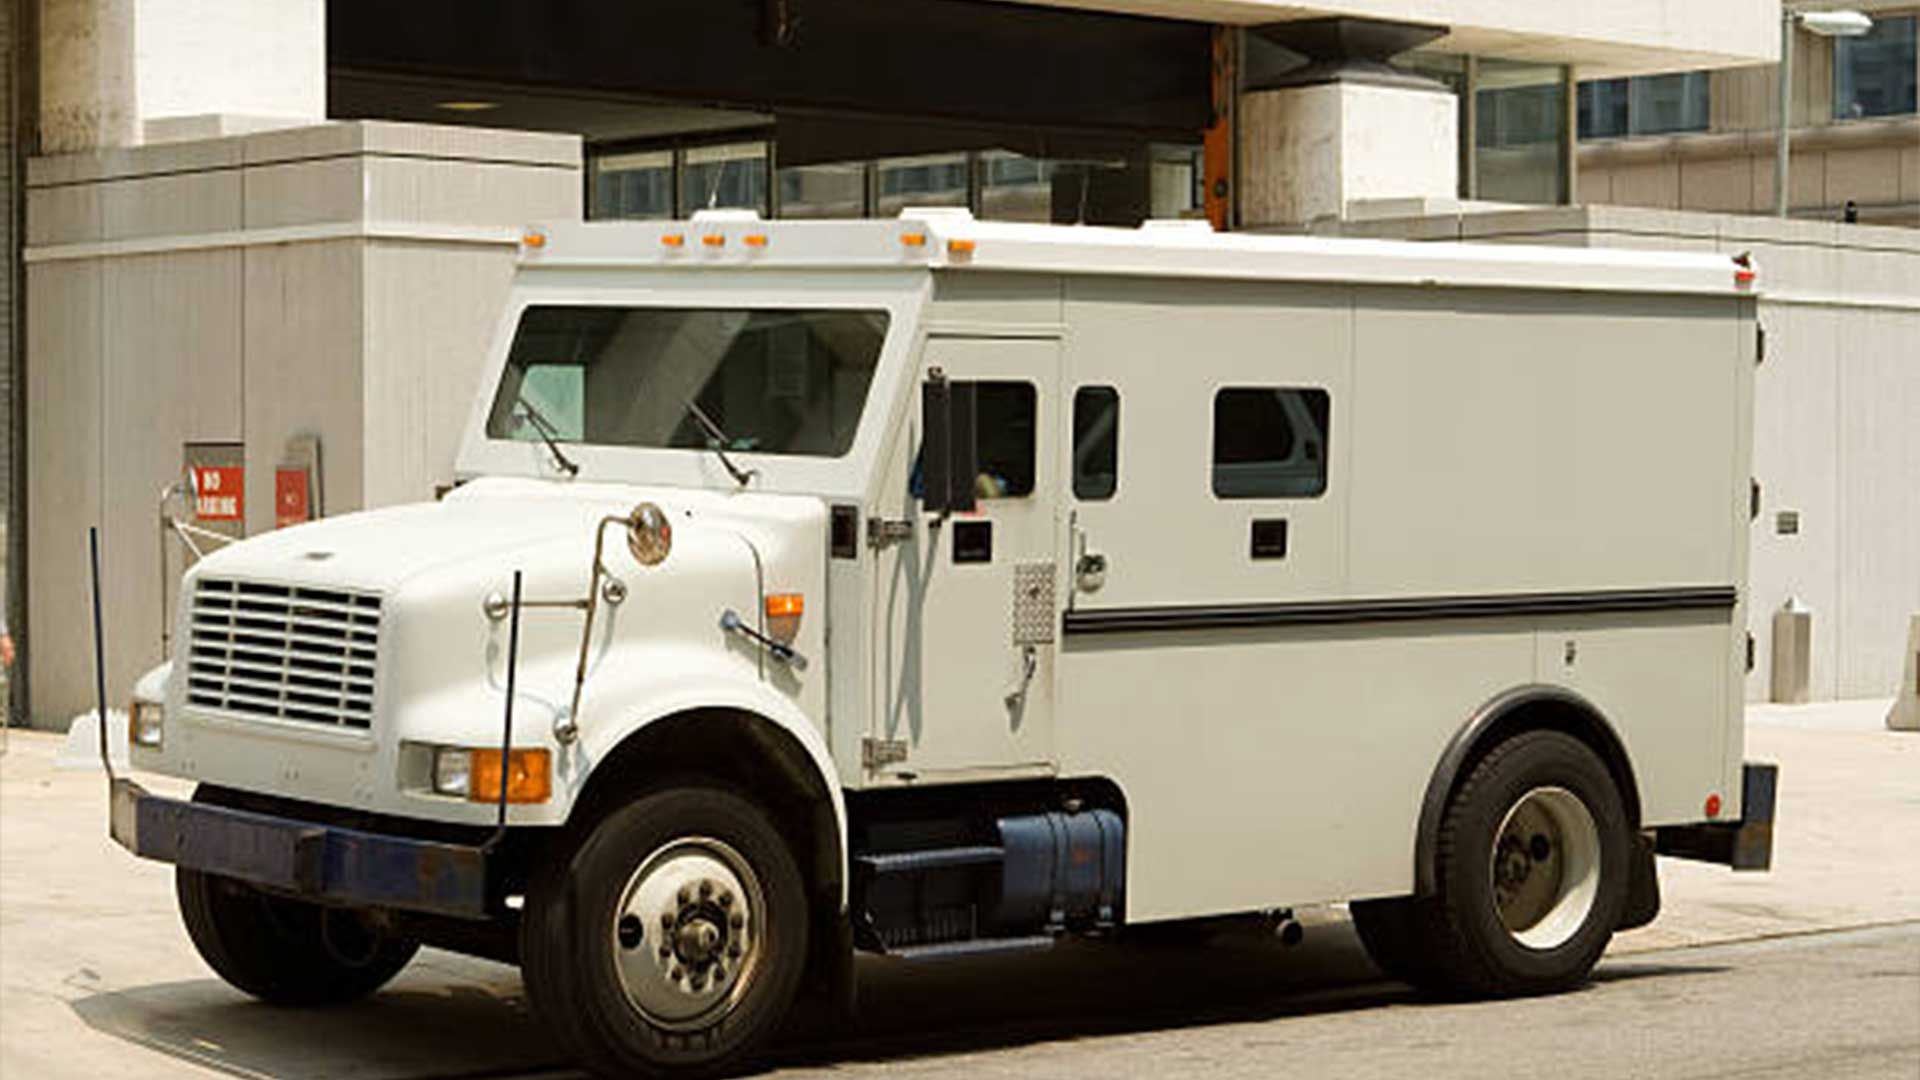 armored vehicle services